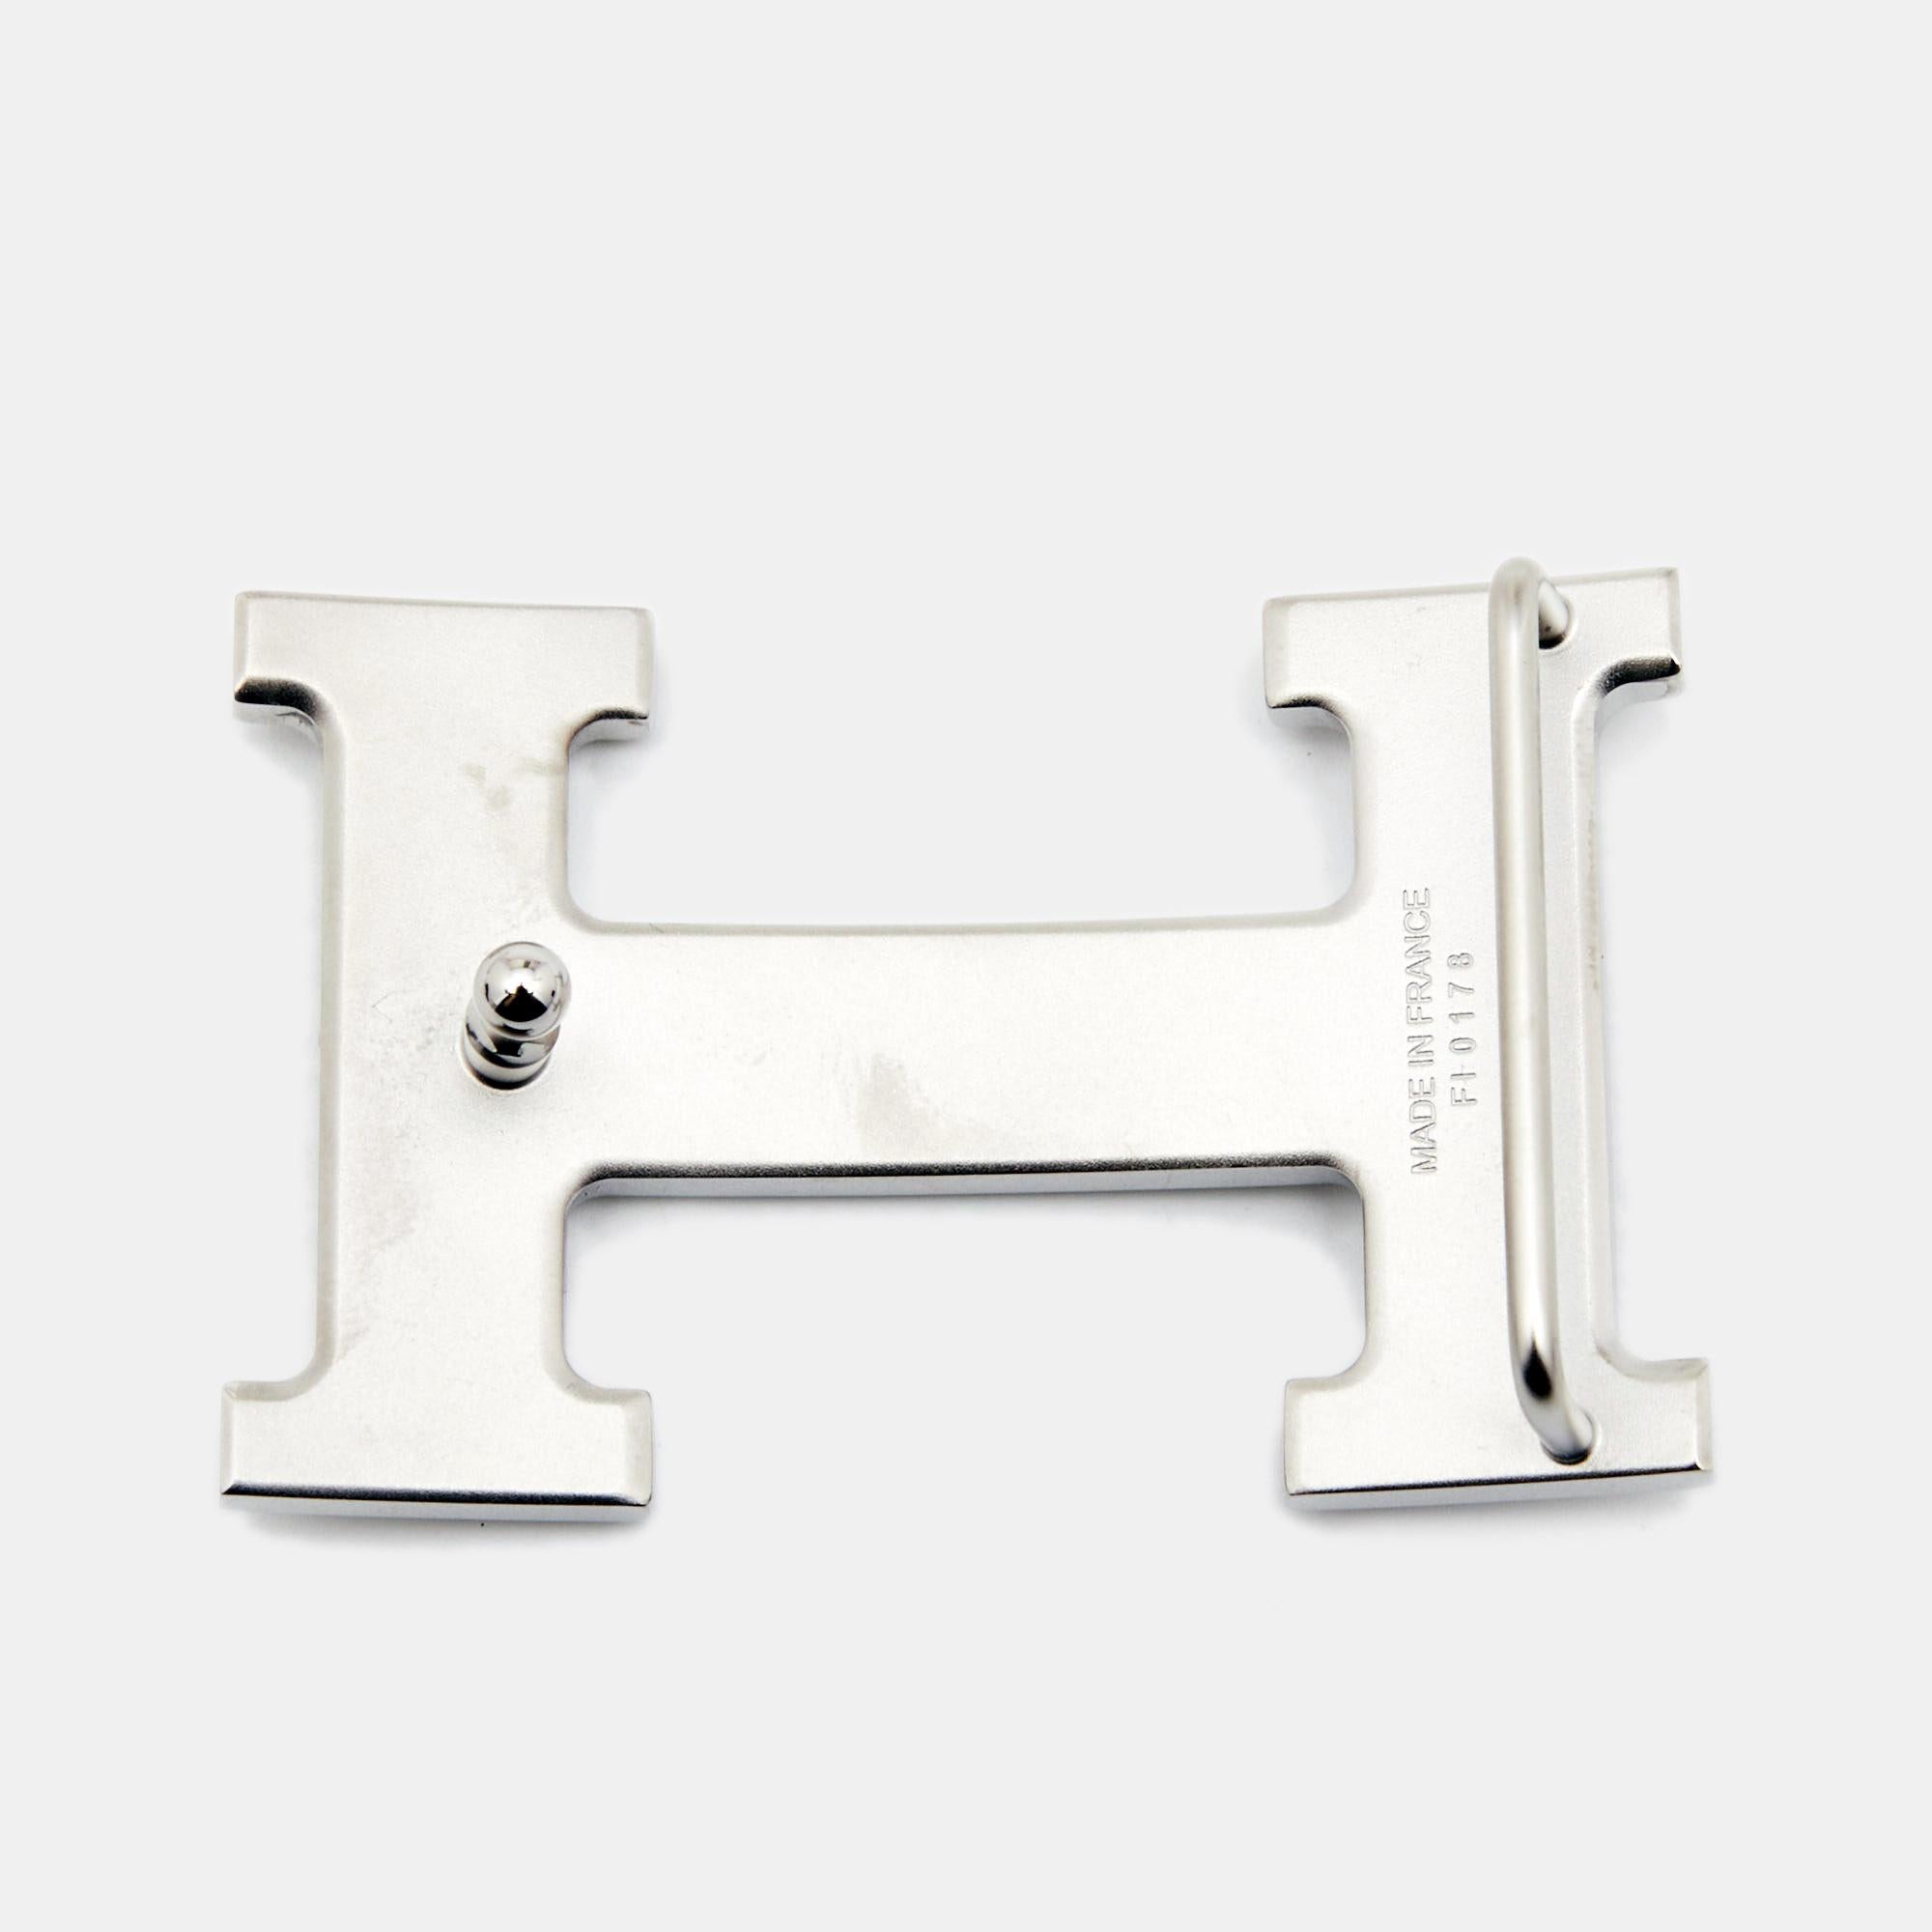 This Constance belt buckle from Hermès is grand in style and high on functionality. It has been crafted from palladium-plated metal in the brand's signature 'H' shape. It carries neatly engraved logo details on the back and the exterior is given a